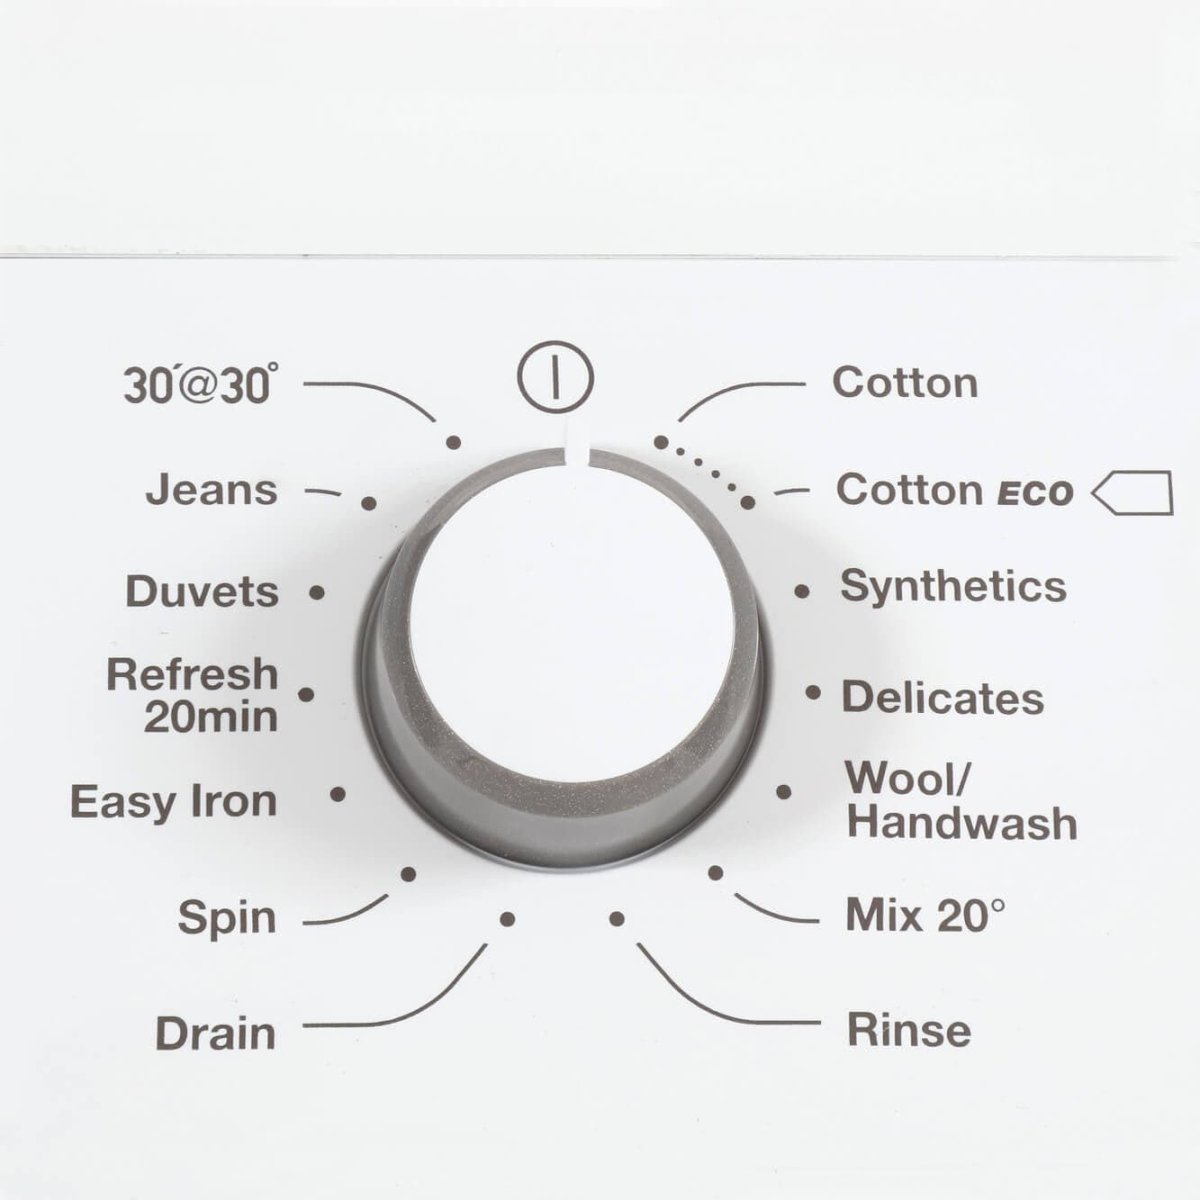 Zanussi ZWF01483WH 10kg 1400 Spin Washing Machine - White - A+++ Rated | Atlantic Electrics